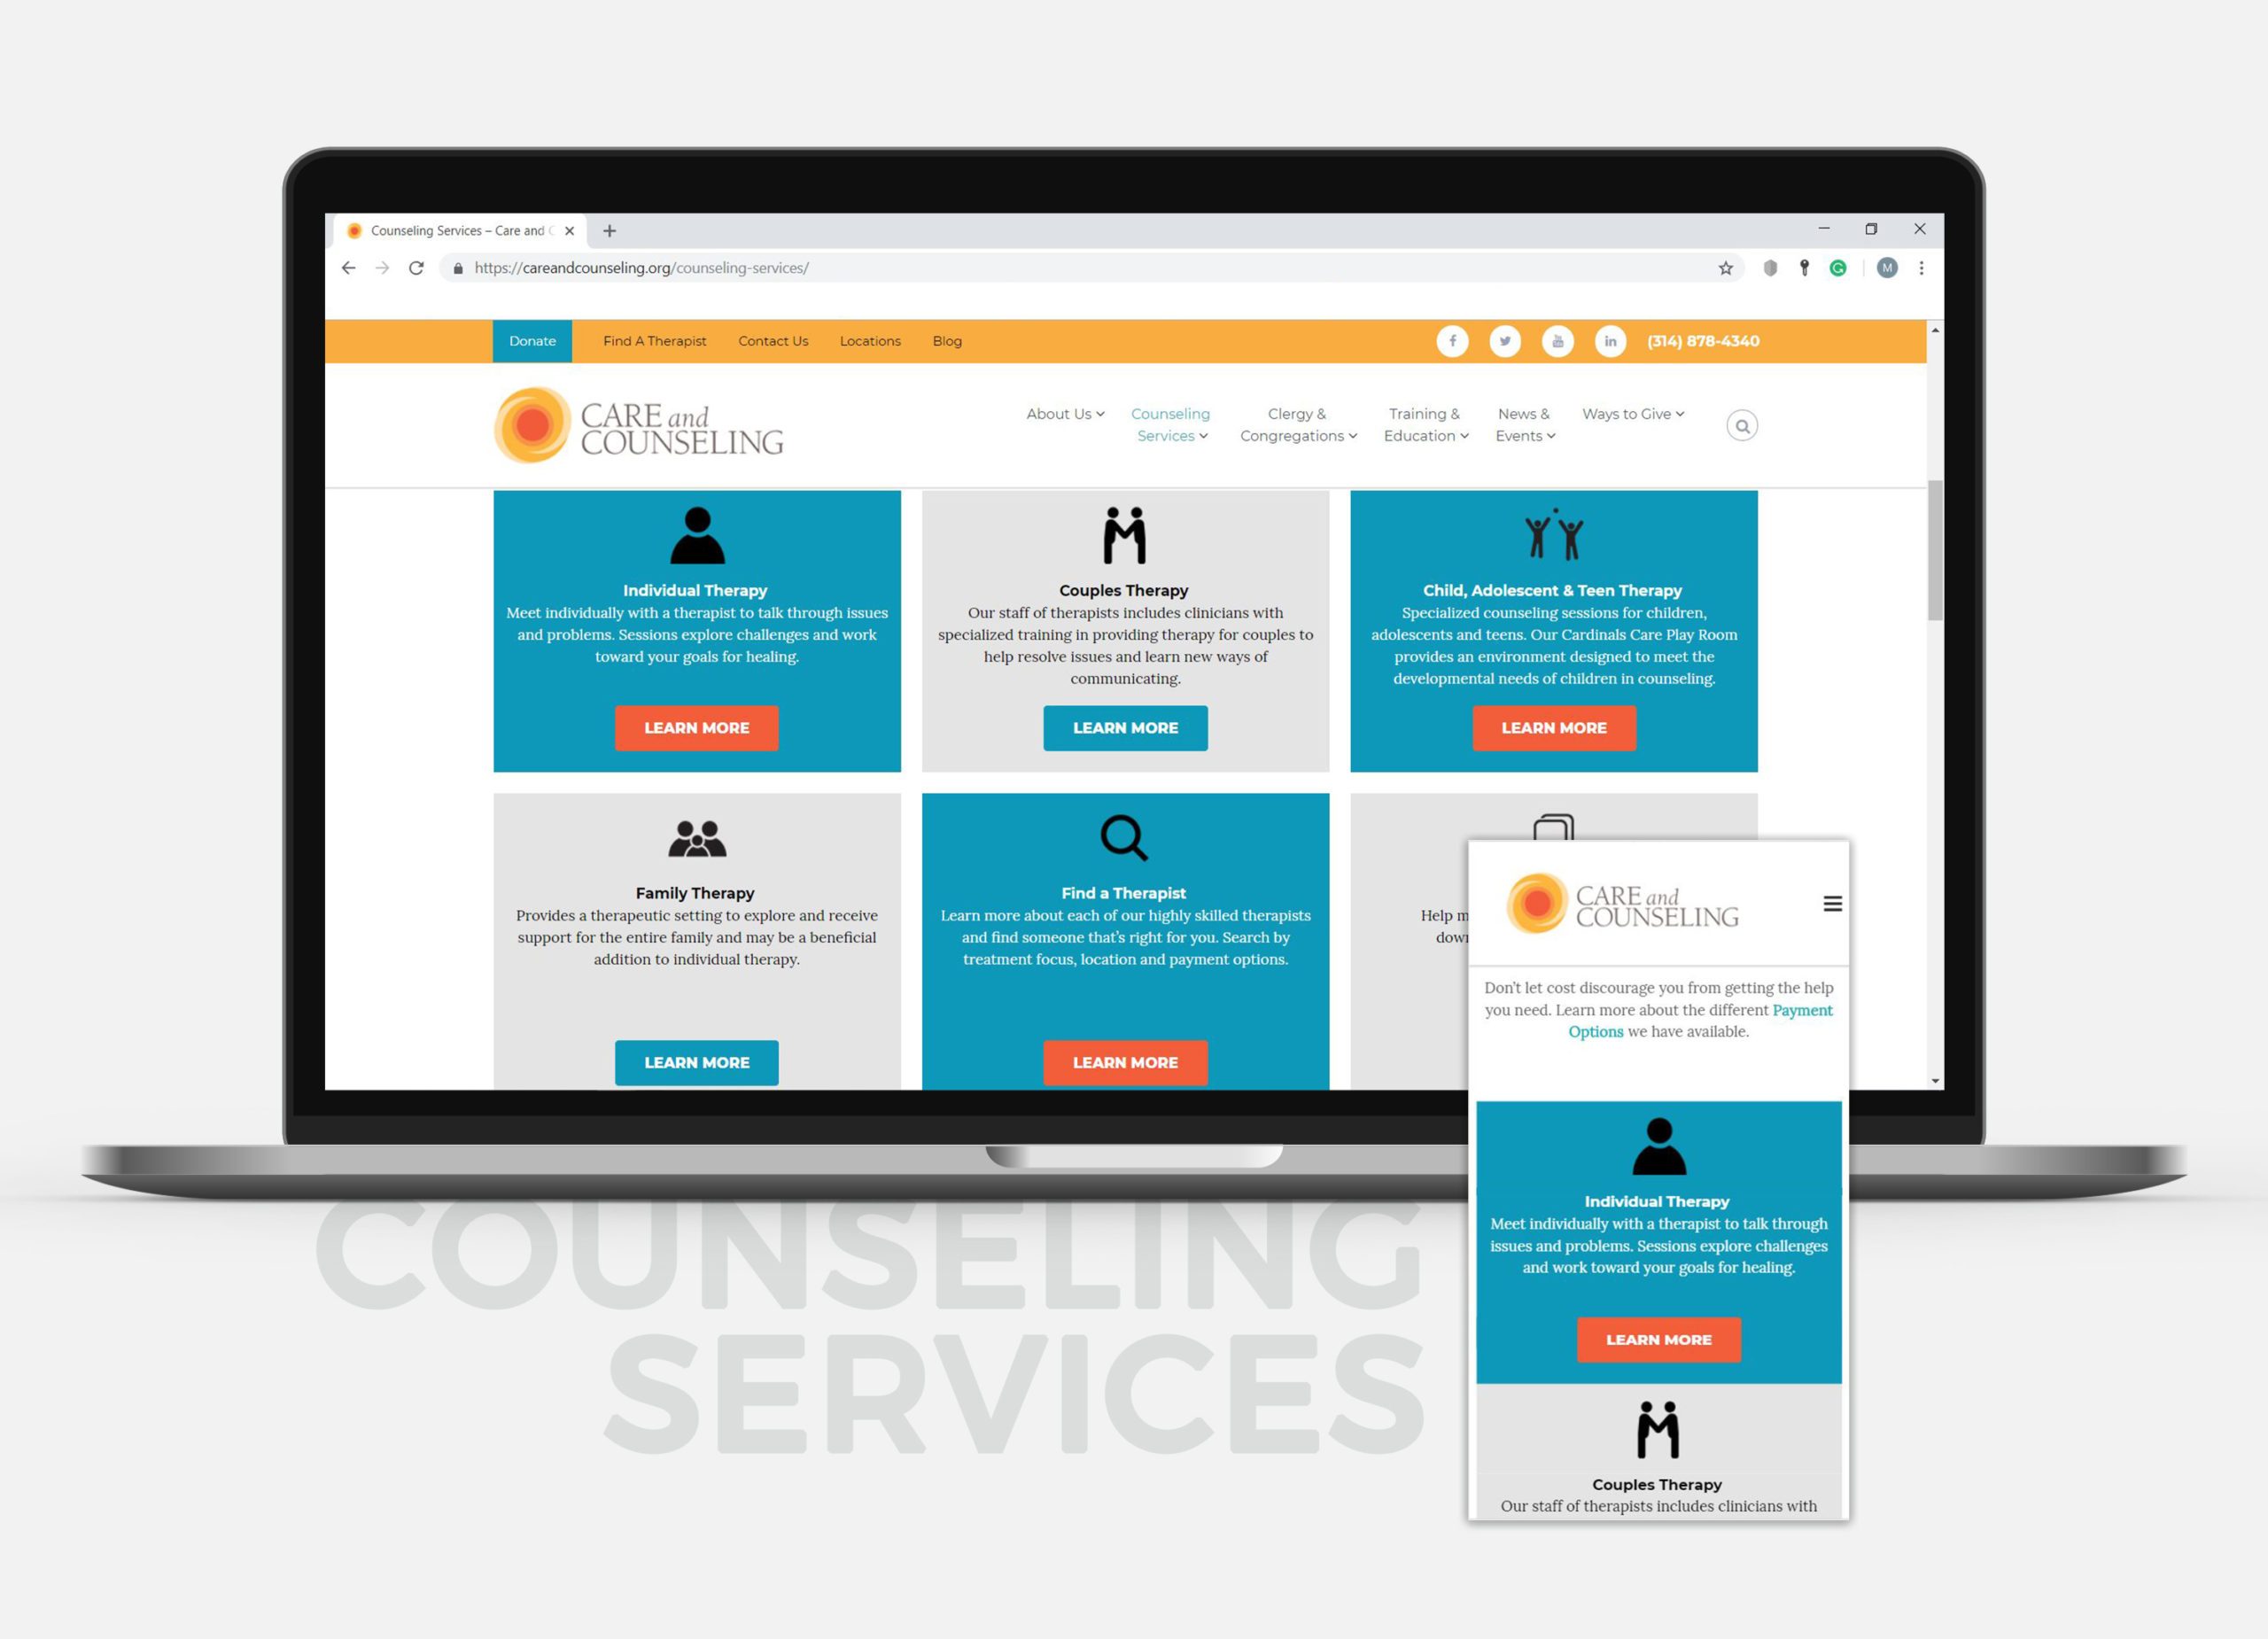 Care and Counseling – Counseling Services Portfolio Image – Designs by Martin Holloway